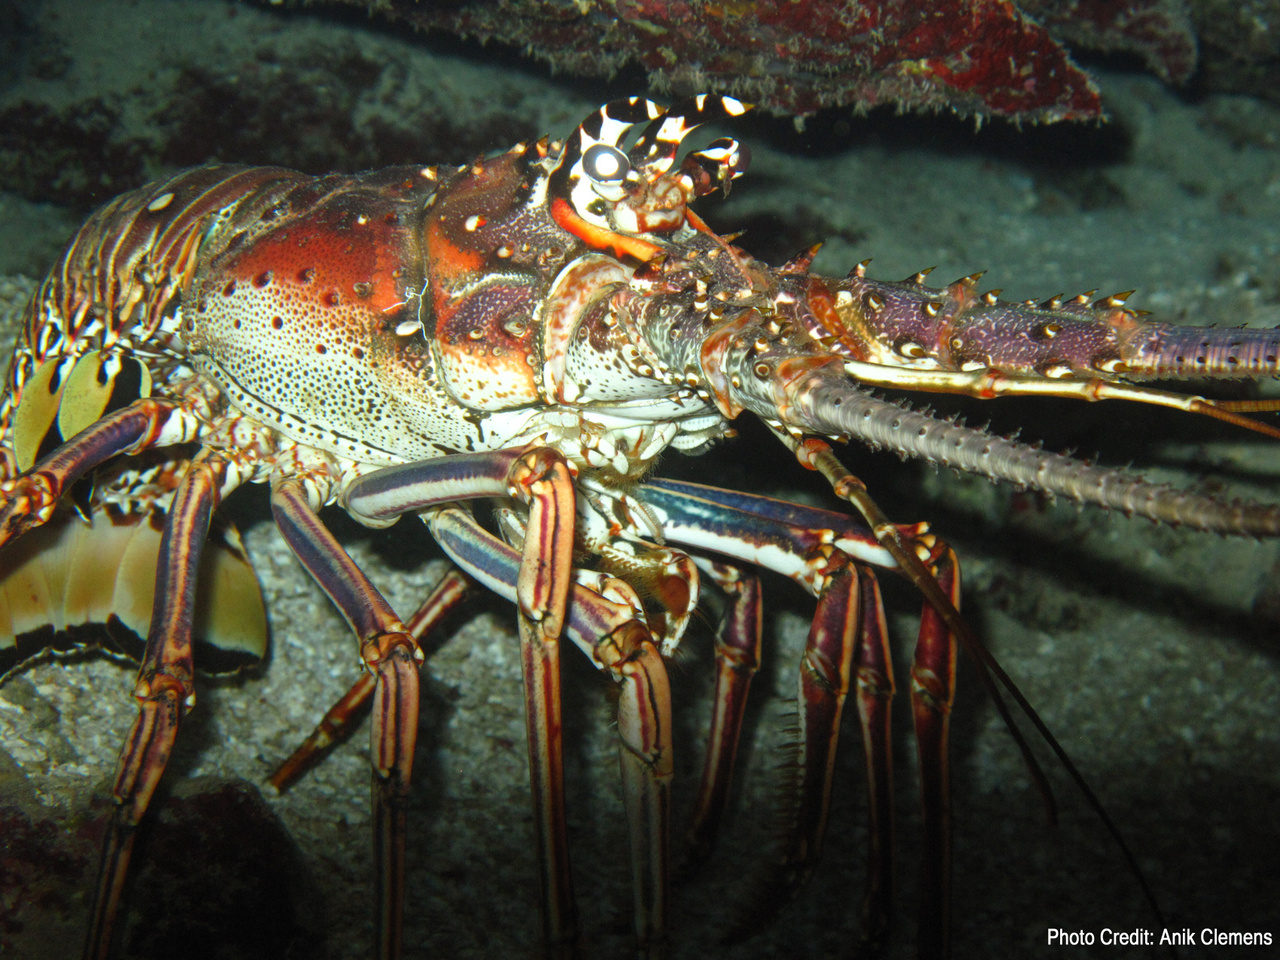 Gulf of Mexico and South Atlantic Spiny Lobster Fishery Management